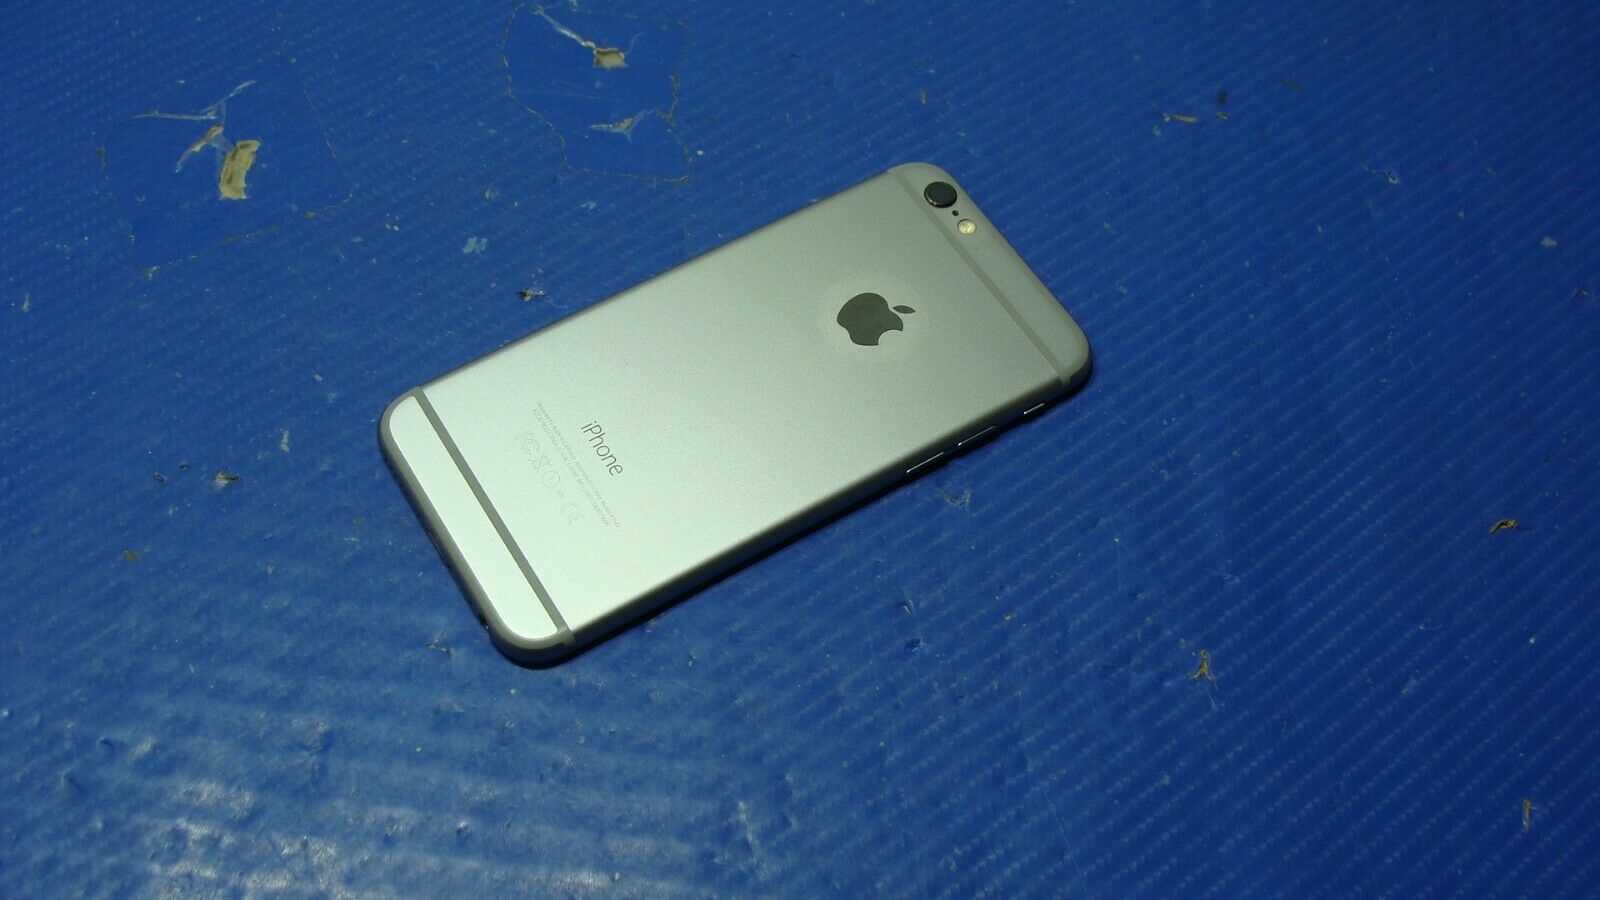 iPhone 6 AT&T A1549 MG4N2LL/A Late 2014 4.7